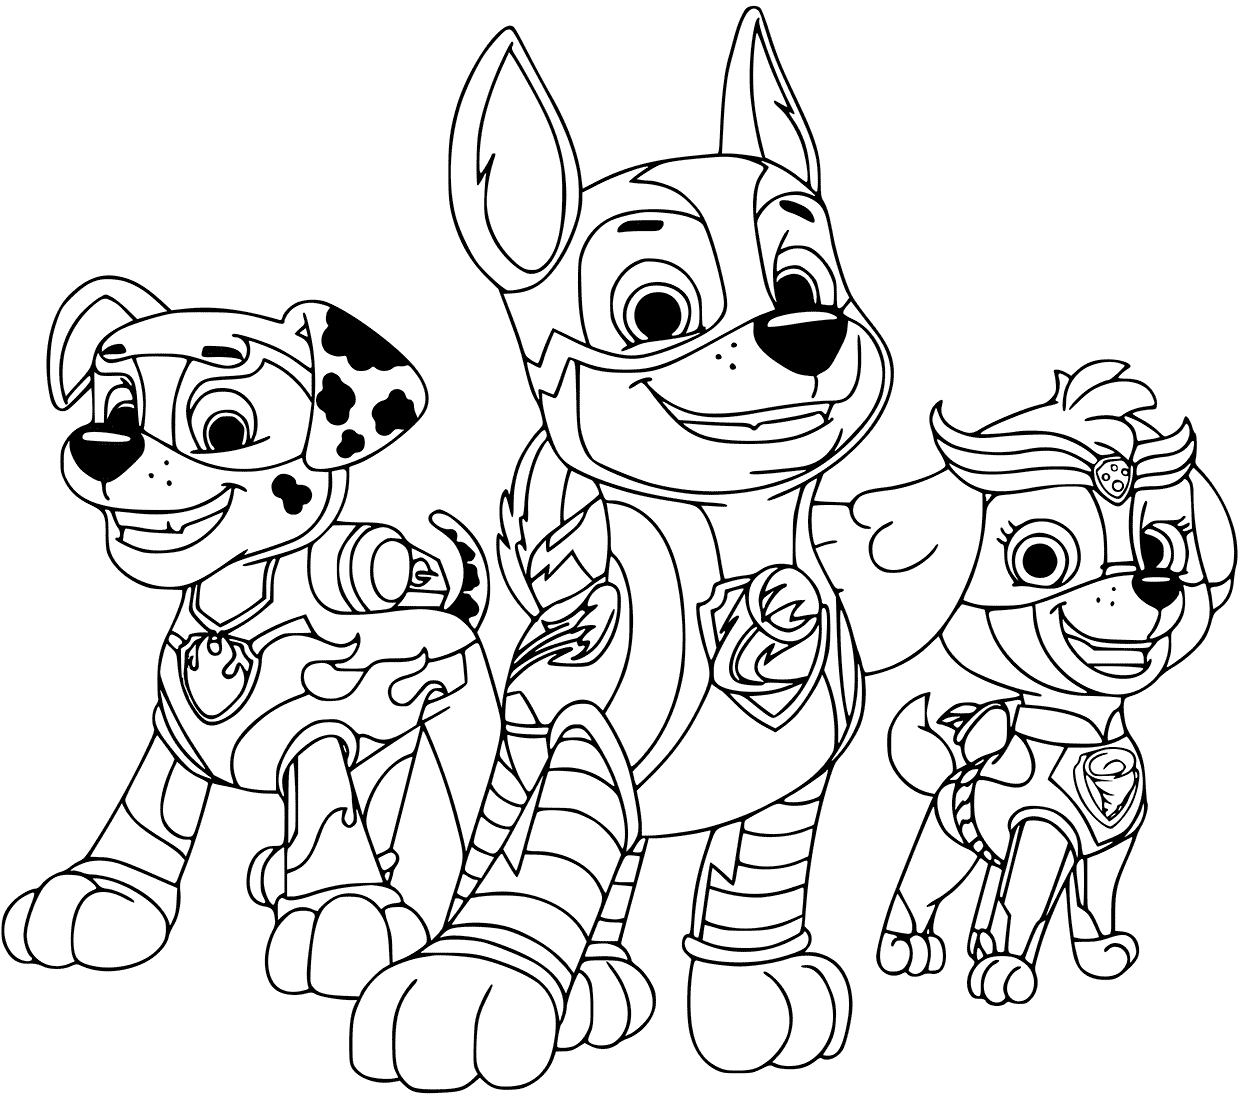 Paw Patrol New Series Coloring Page